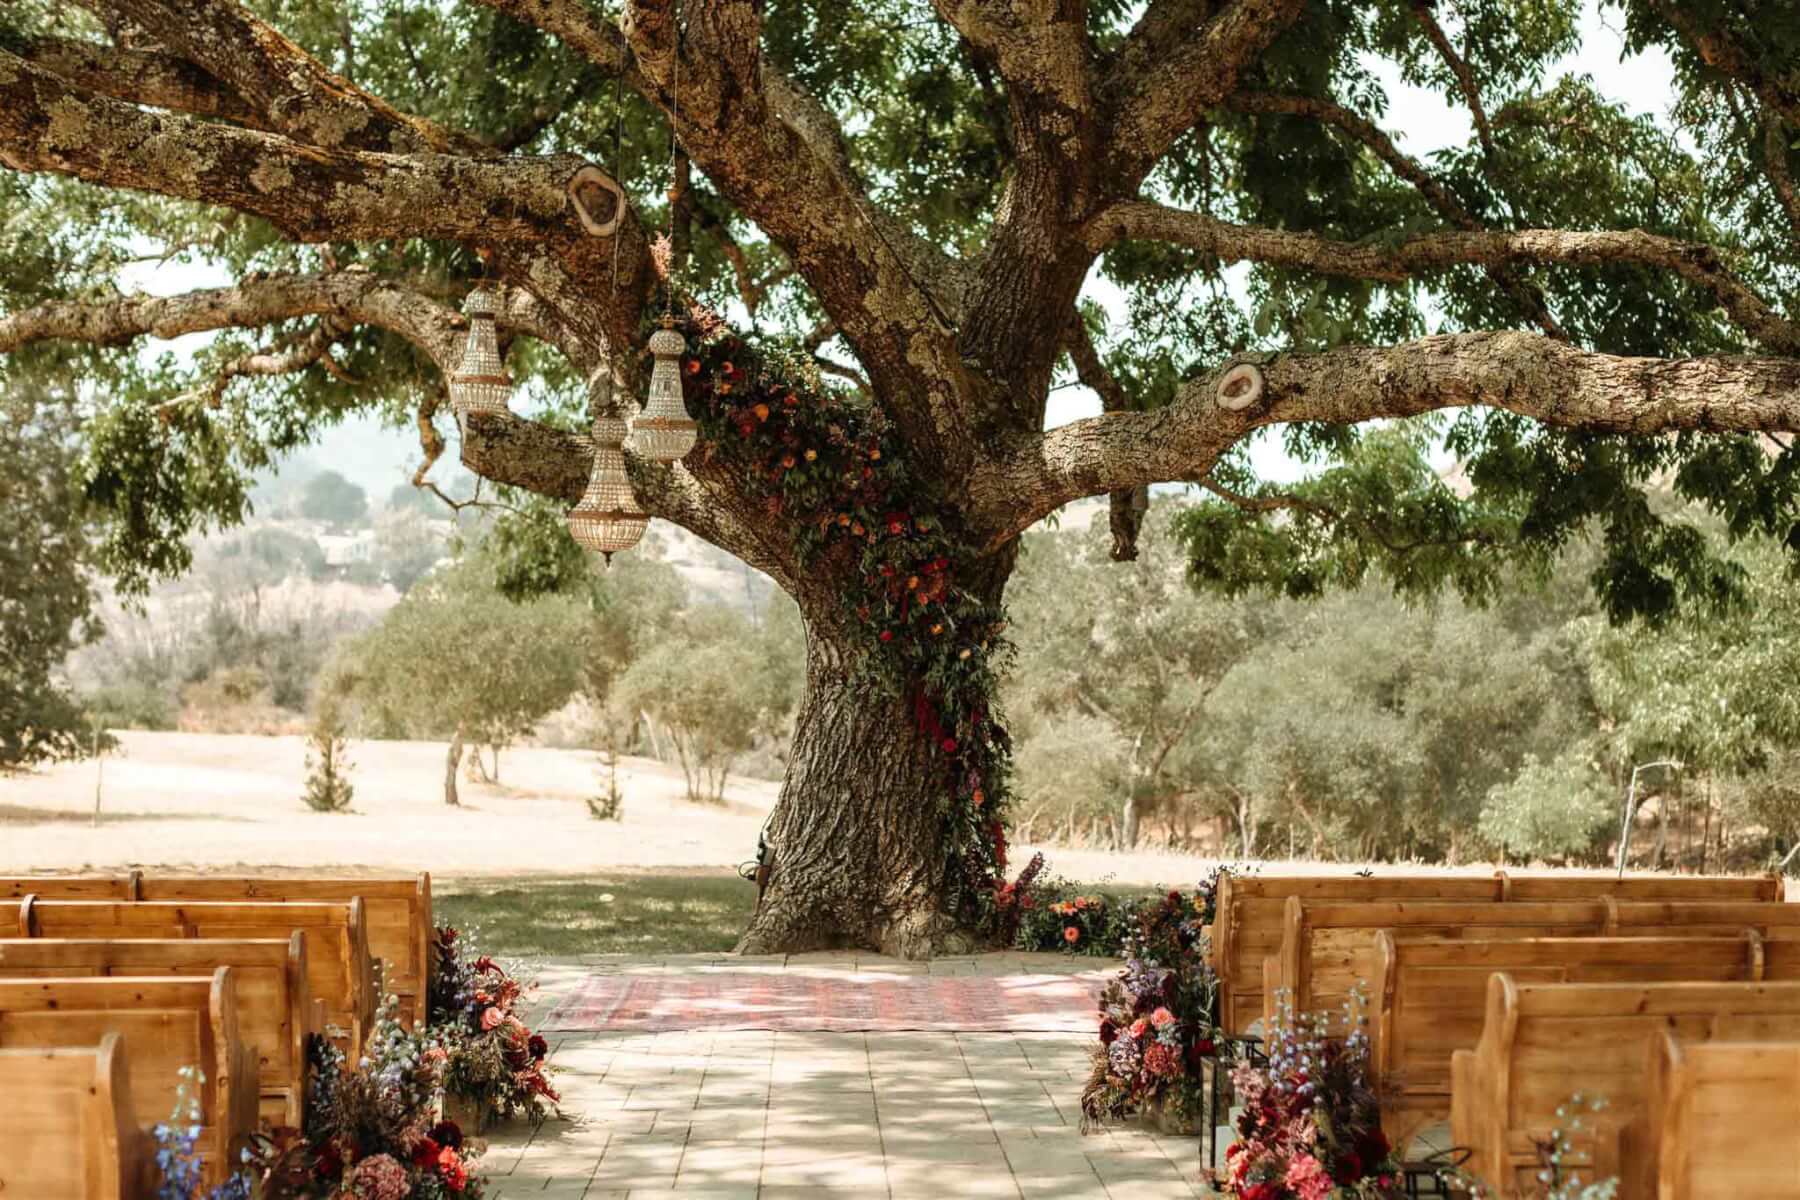 an outdoor wedding view of the empty benches and aisle with a tree at the front, decorated with a swath of flowers